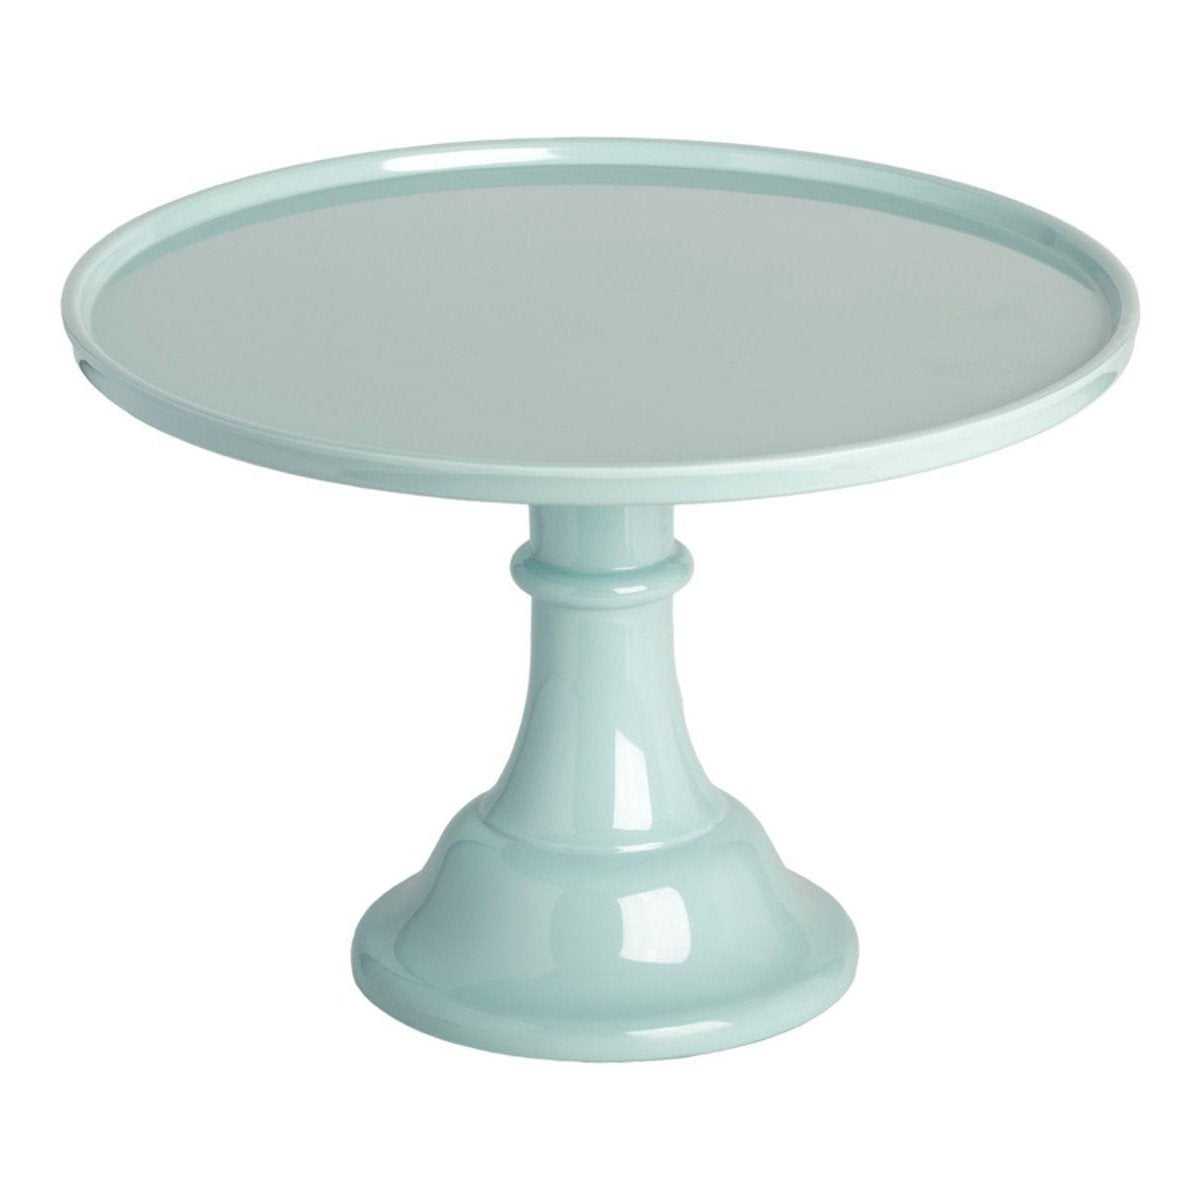 a-little-lovely-company-cake-stand-large-vintage-blue- (1)